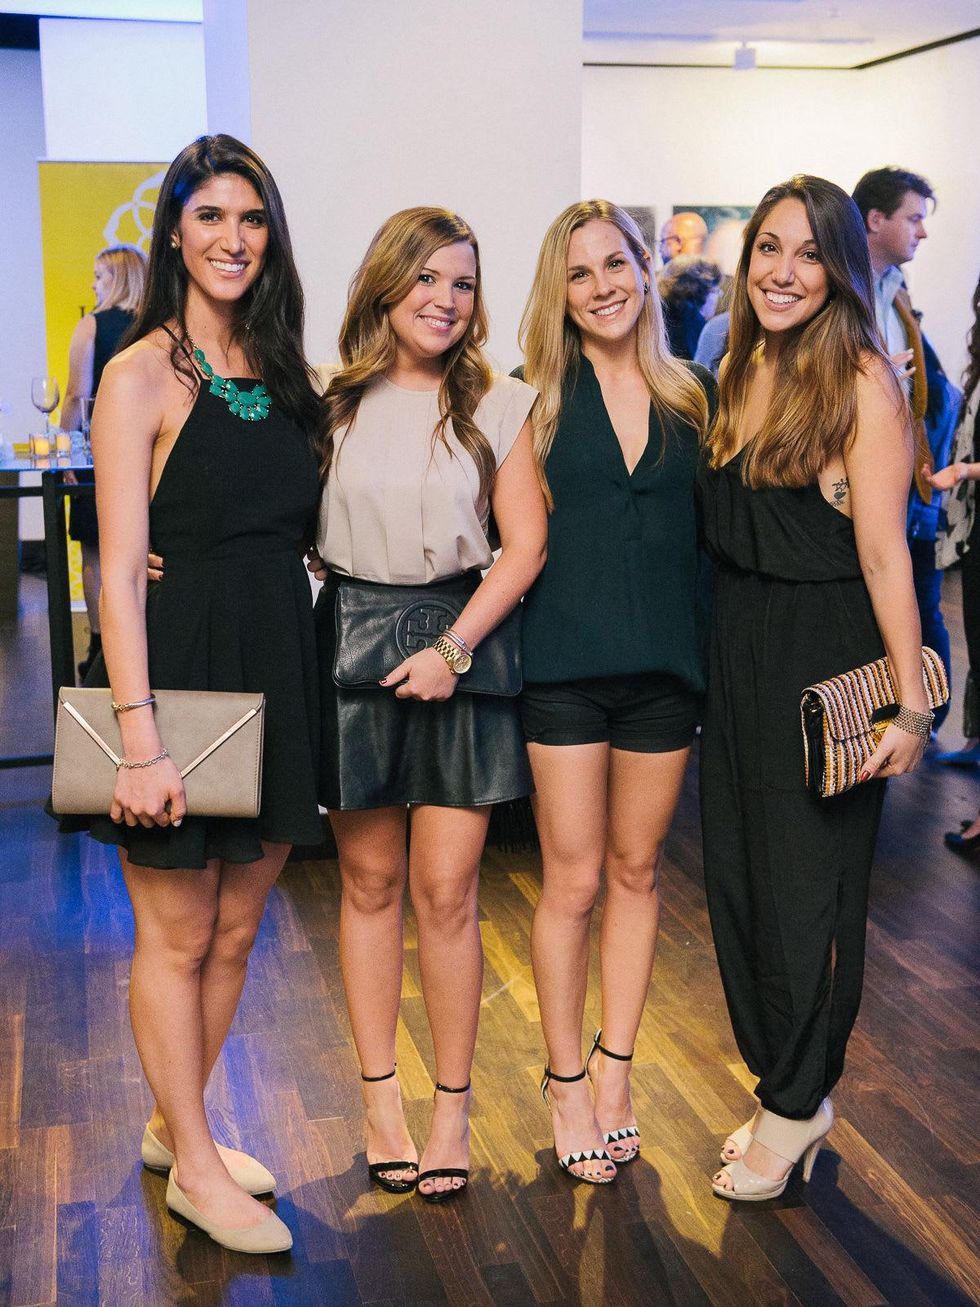 8 Christina Ghoson, from left, Kellie Vincent, Holly Gambini and Cristina Halliburton at CultureMap fifth anniversary birthday party October 2014